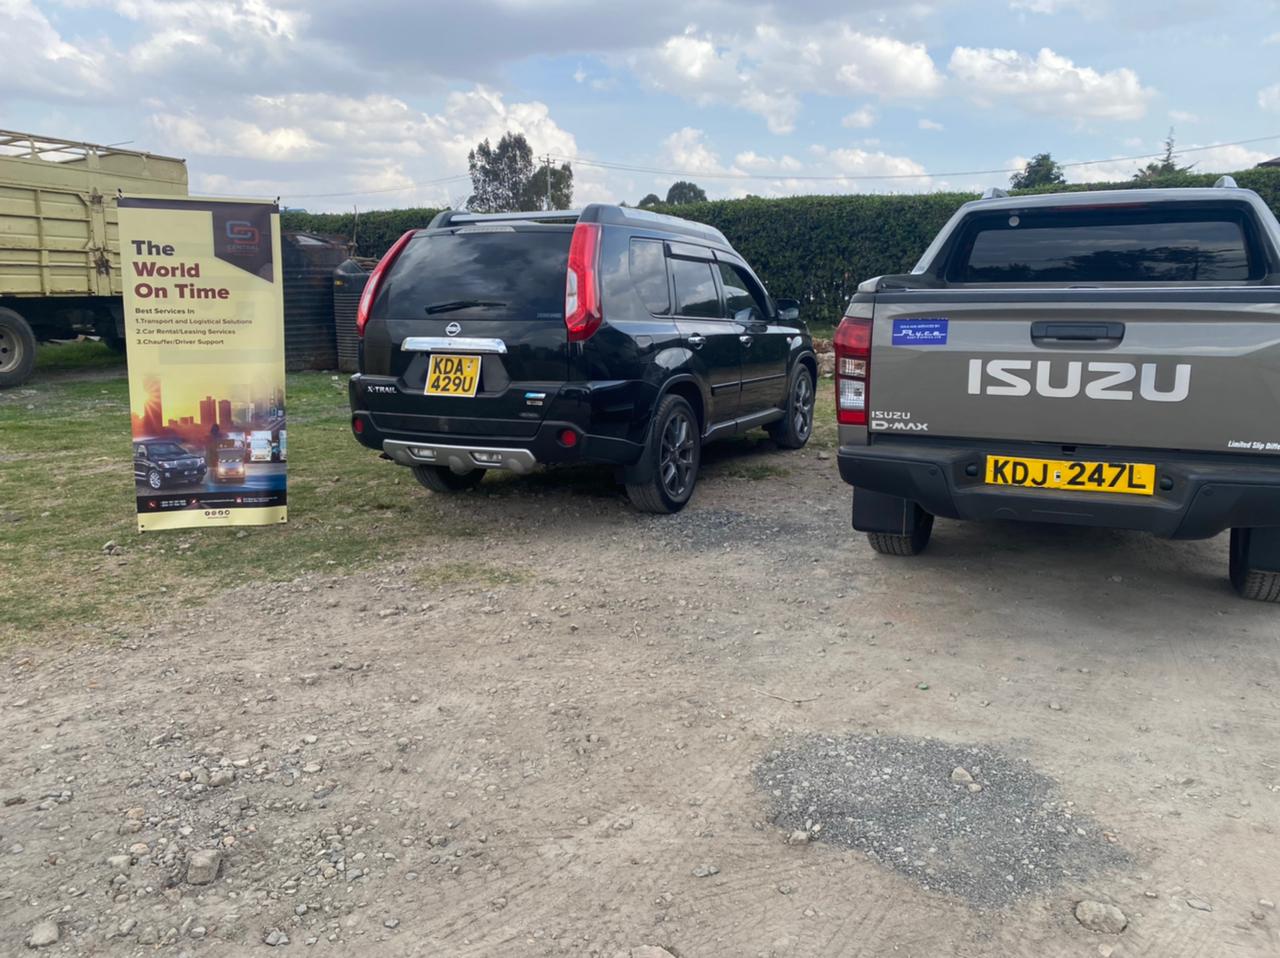 Toyota Xtrail and Isuzu D-max for hire